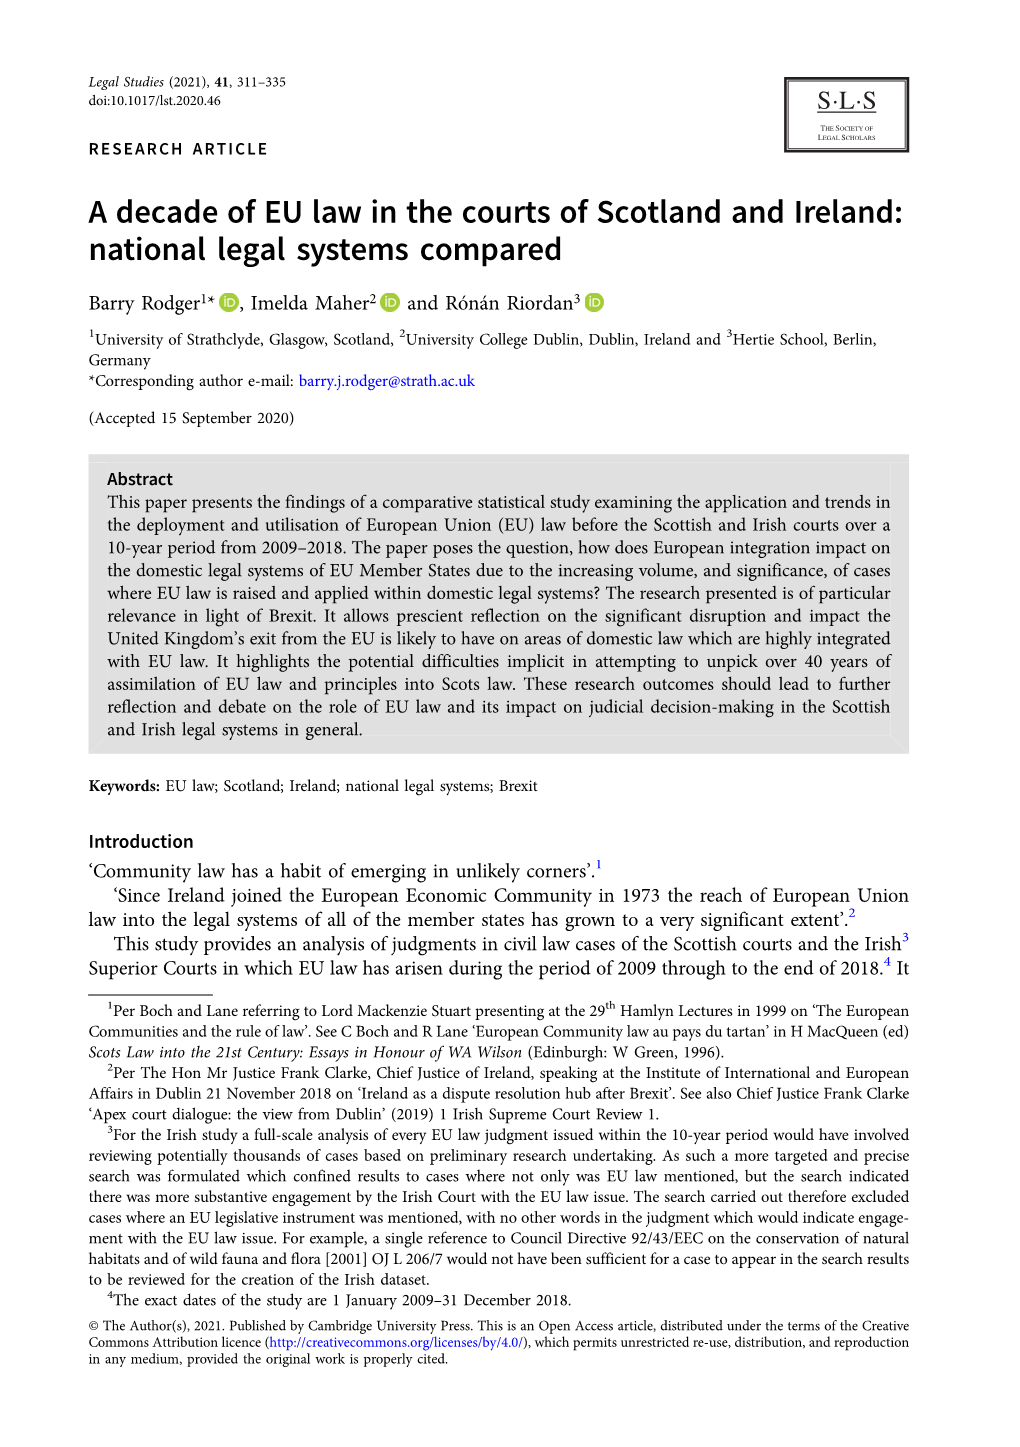 A Decade of EU Law in the Courts of Scotland and Ireland: National Legal Systems Compared